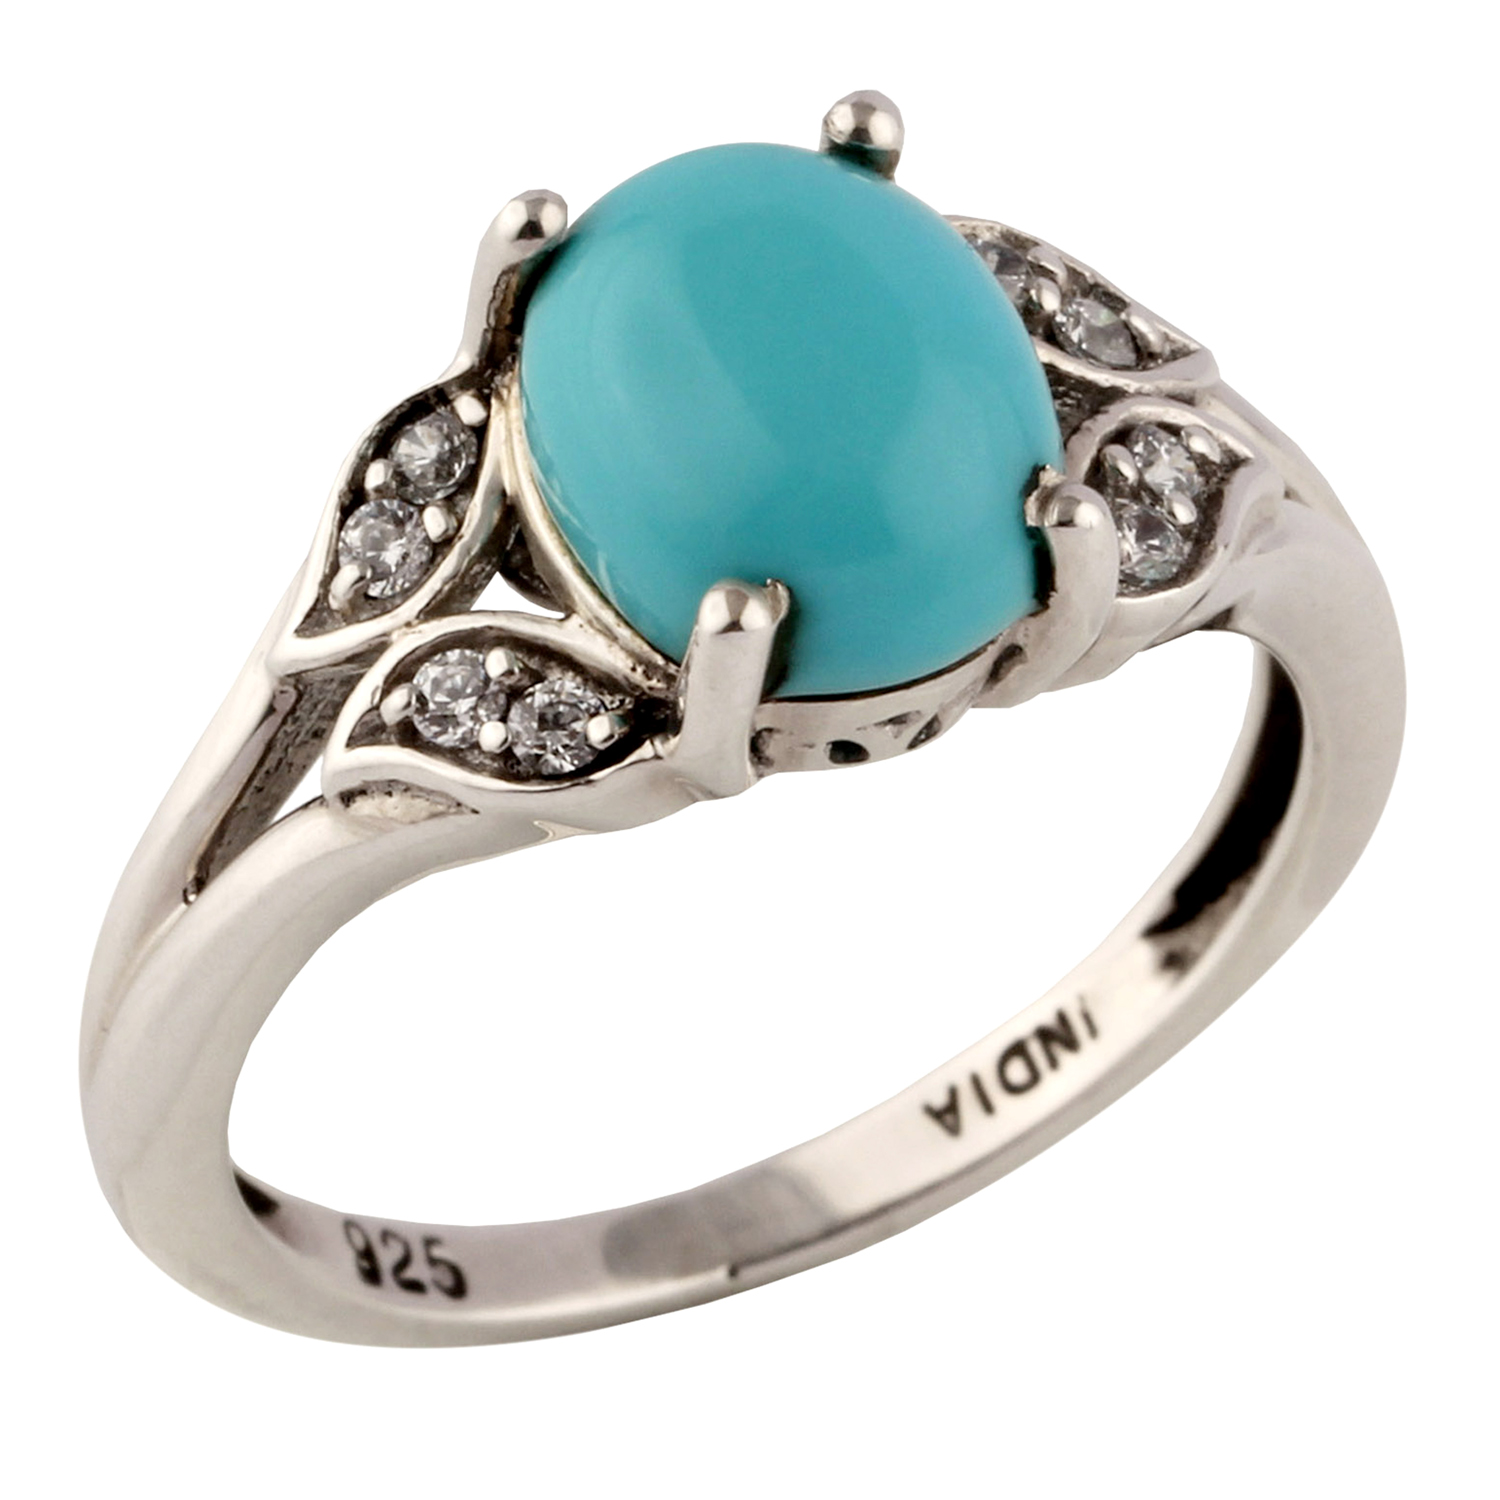 Turquoise and Zirconia Ring